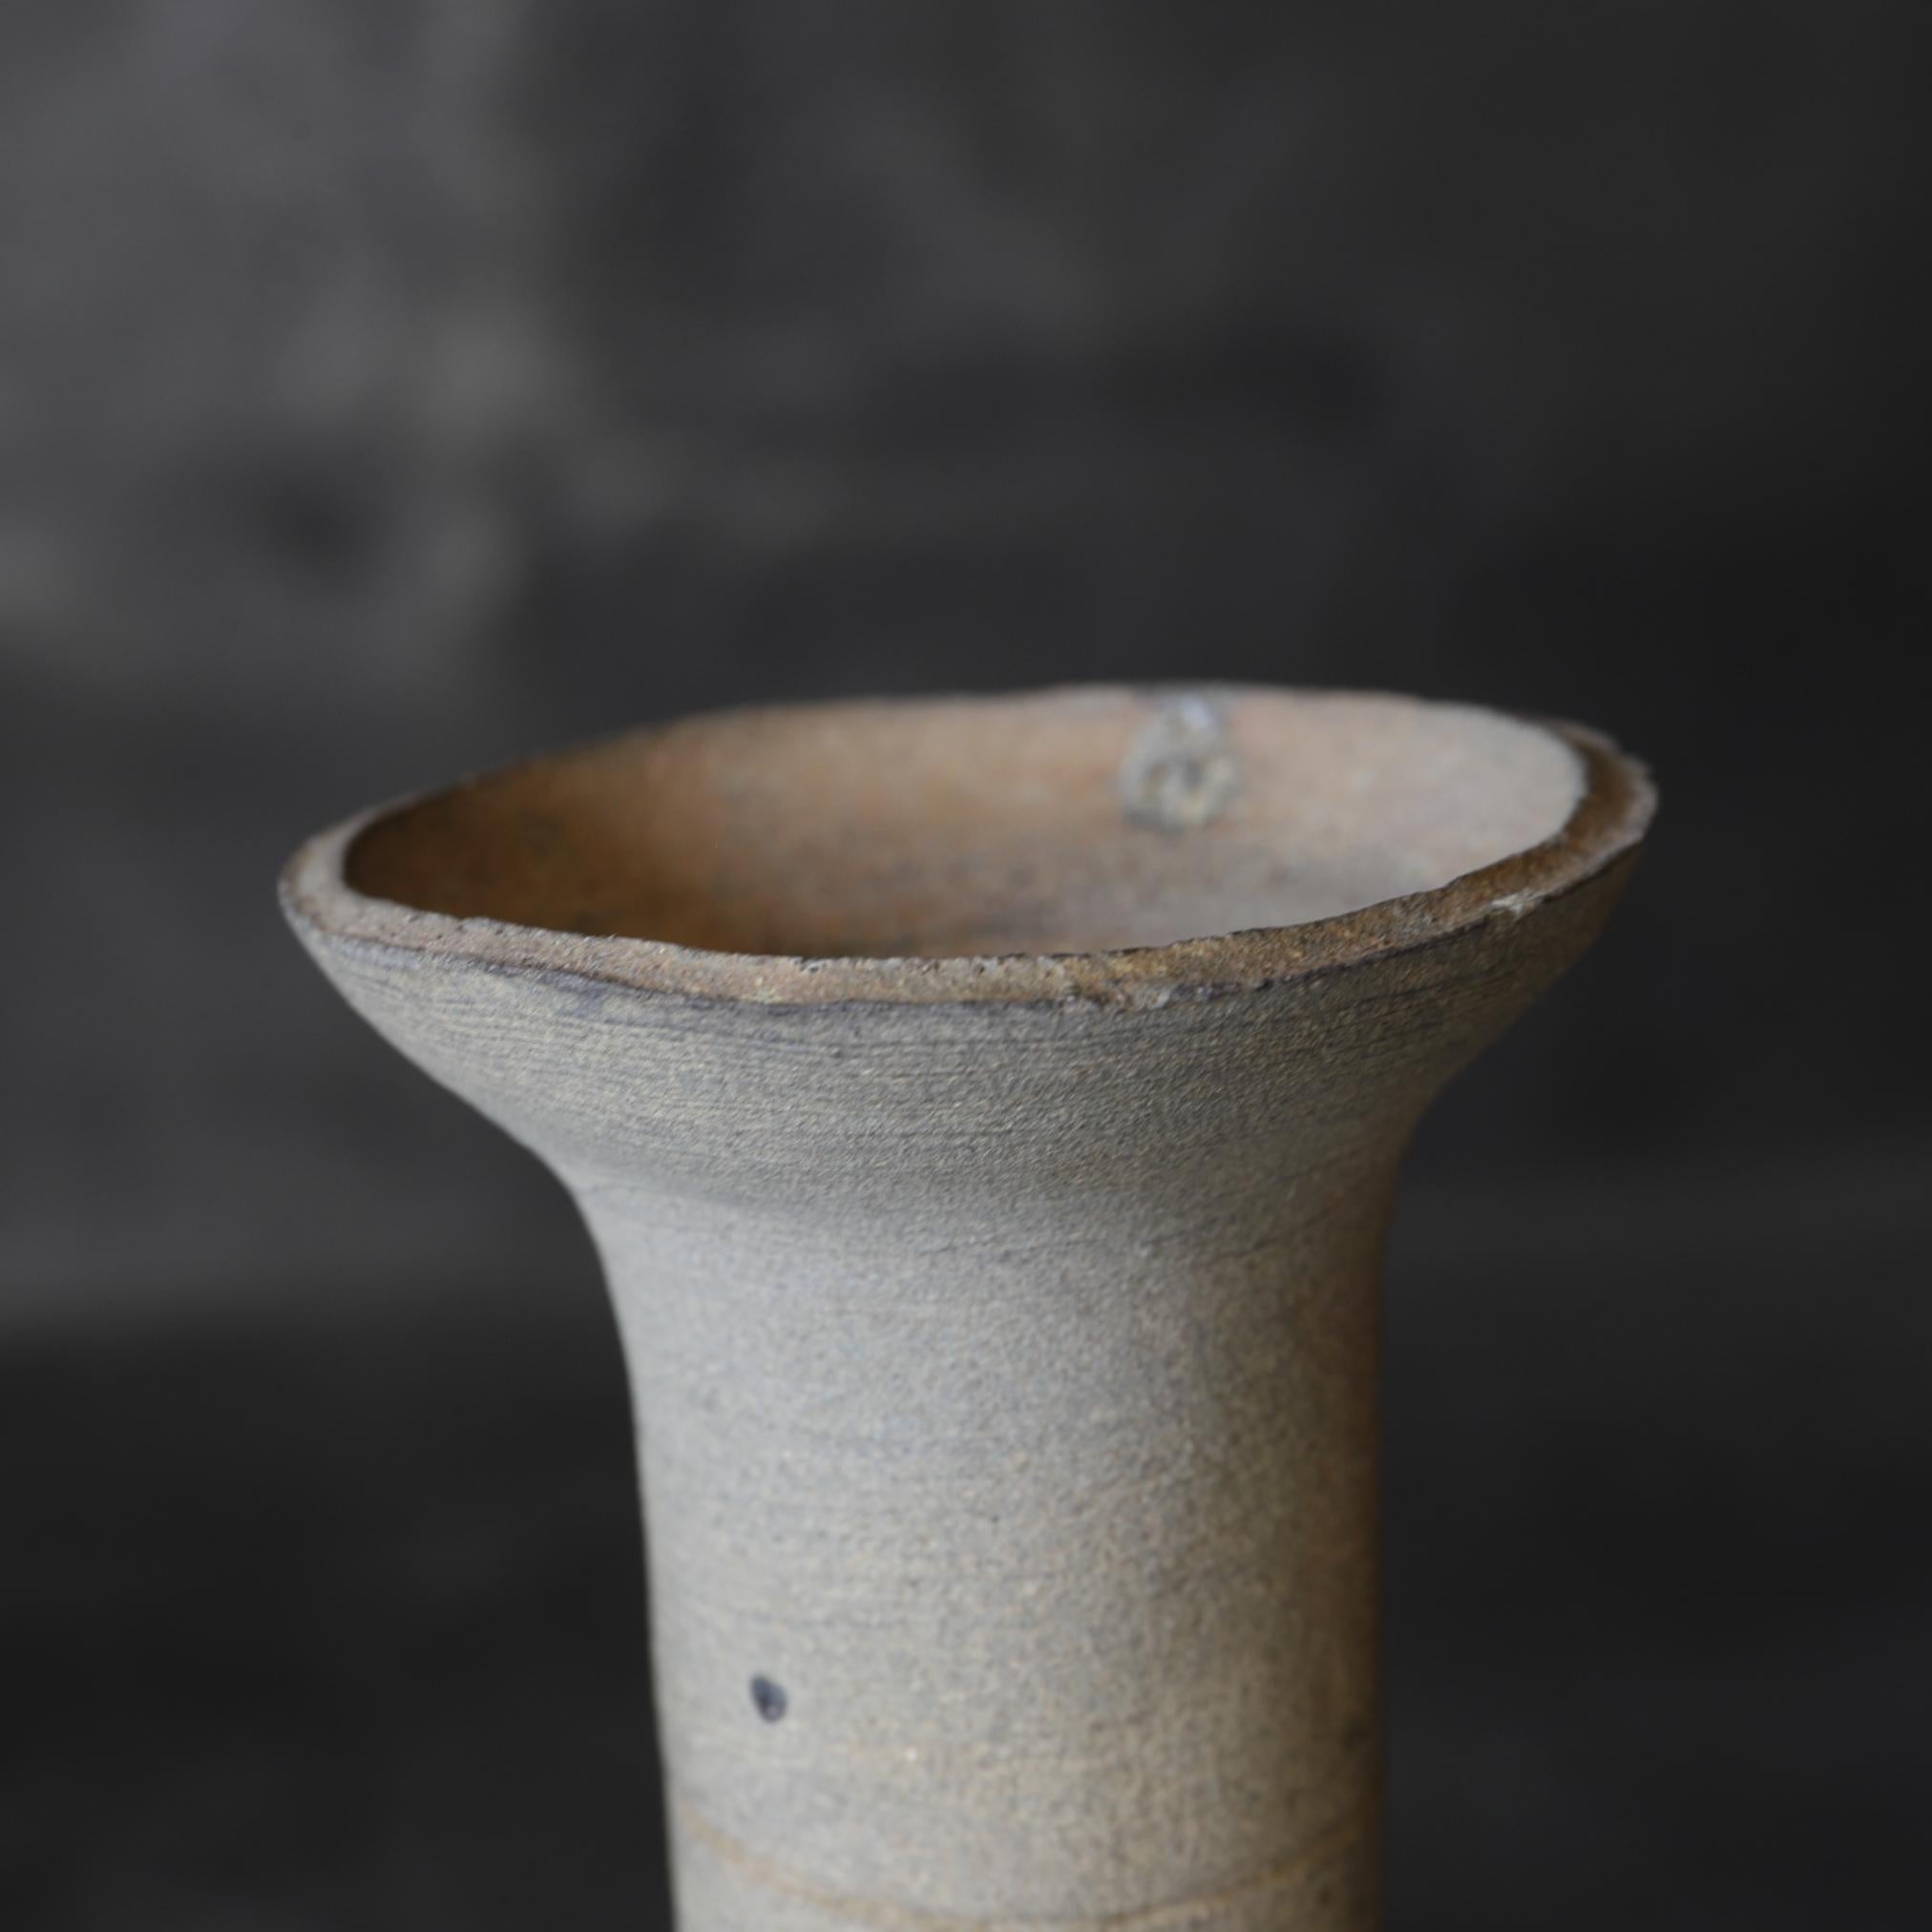 Sue Ware Long Neck Jar / Japanese Antique / Asuka Period / 592-710 CE For Sale 8